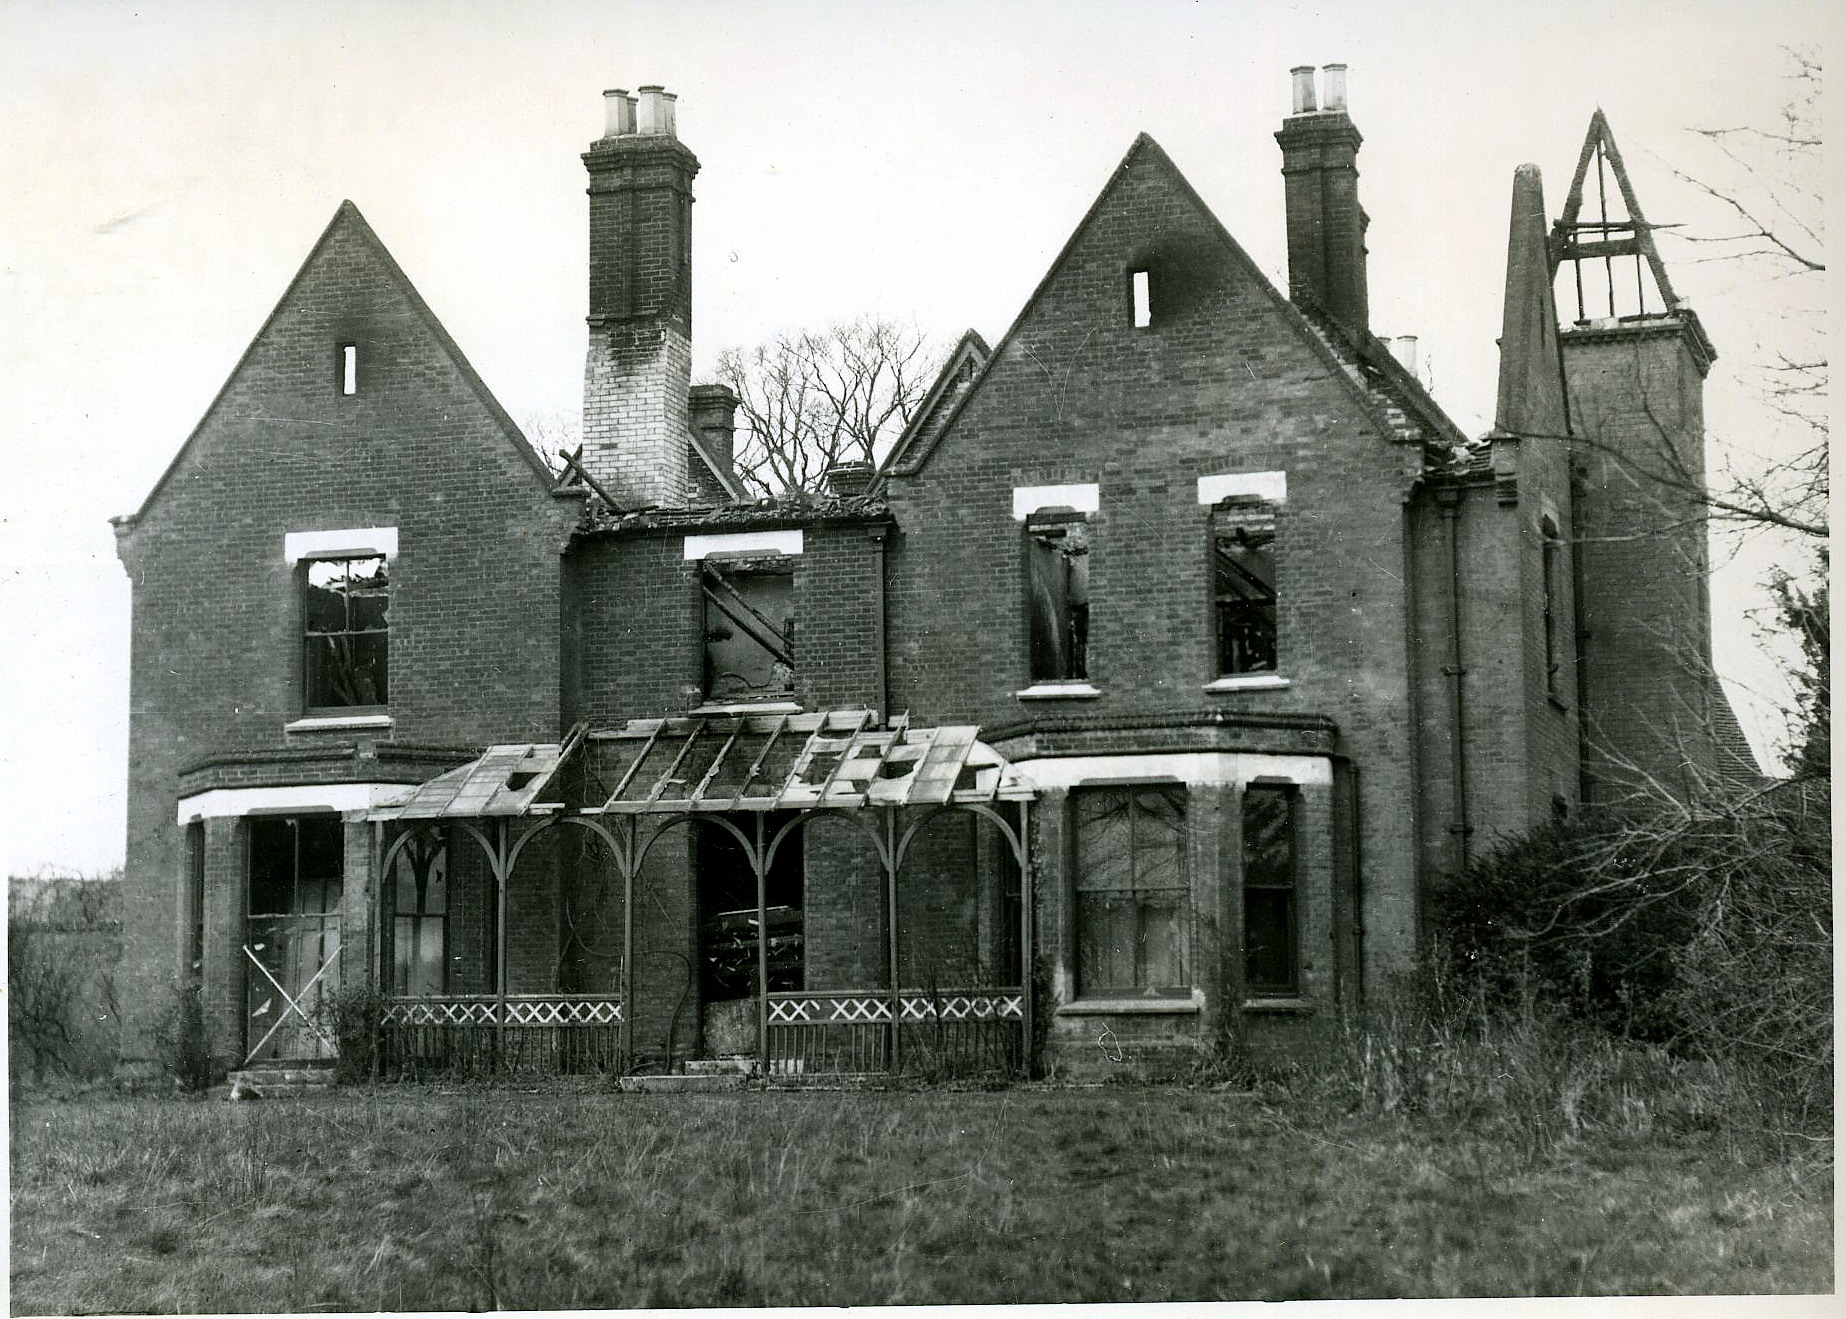 The Most Haunted House In The World – Borley Rectory